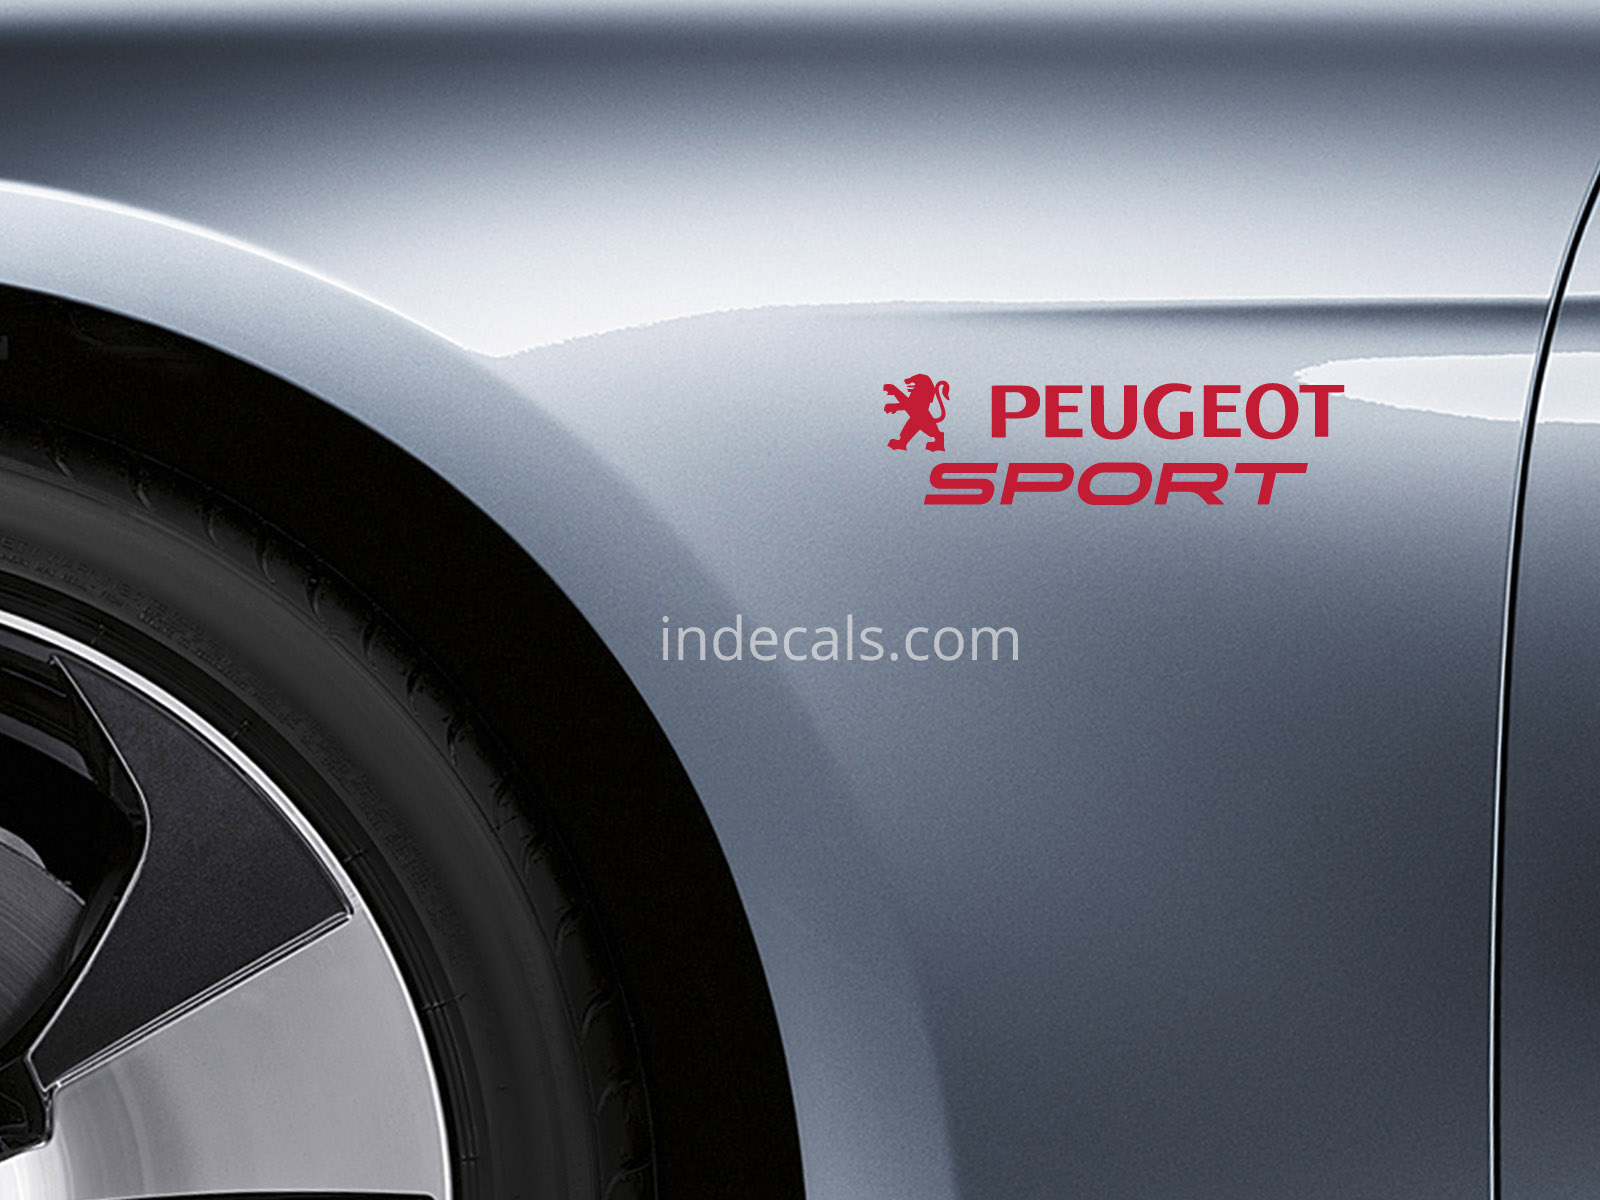 2 x Peugeot Sports stickers for Wings - Red